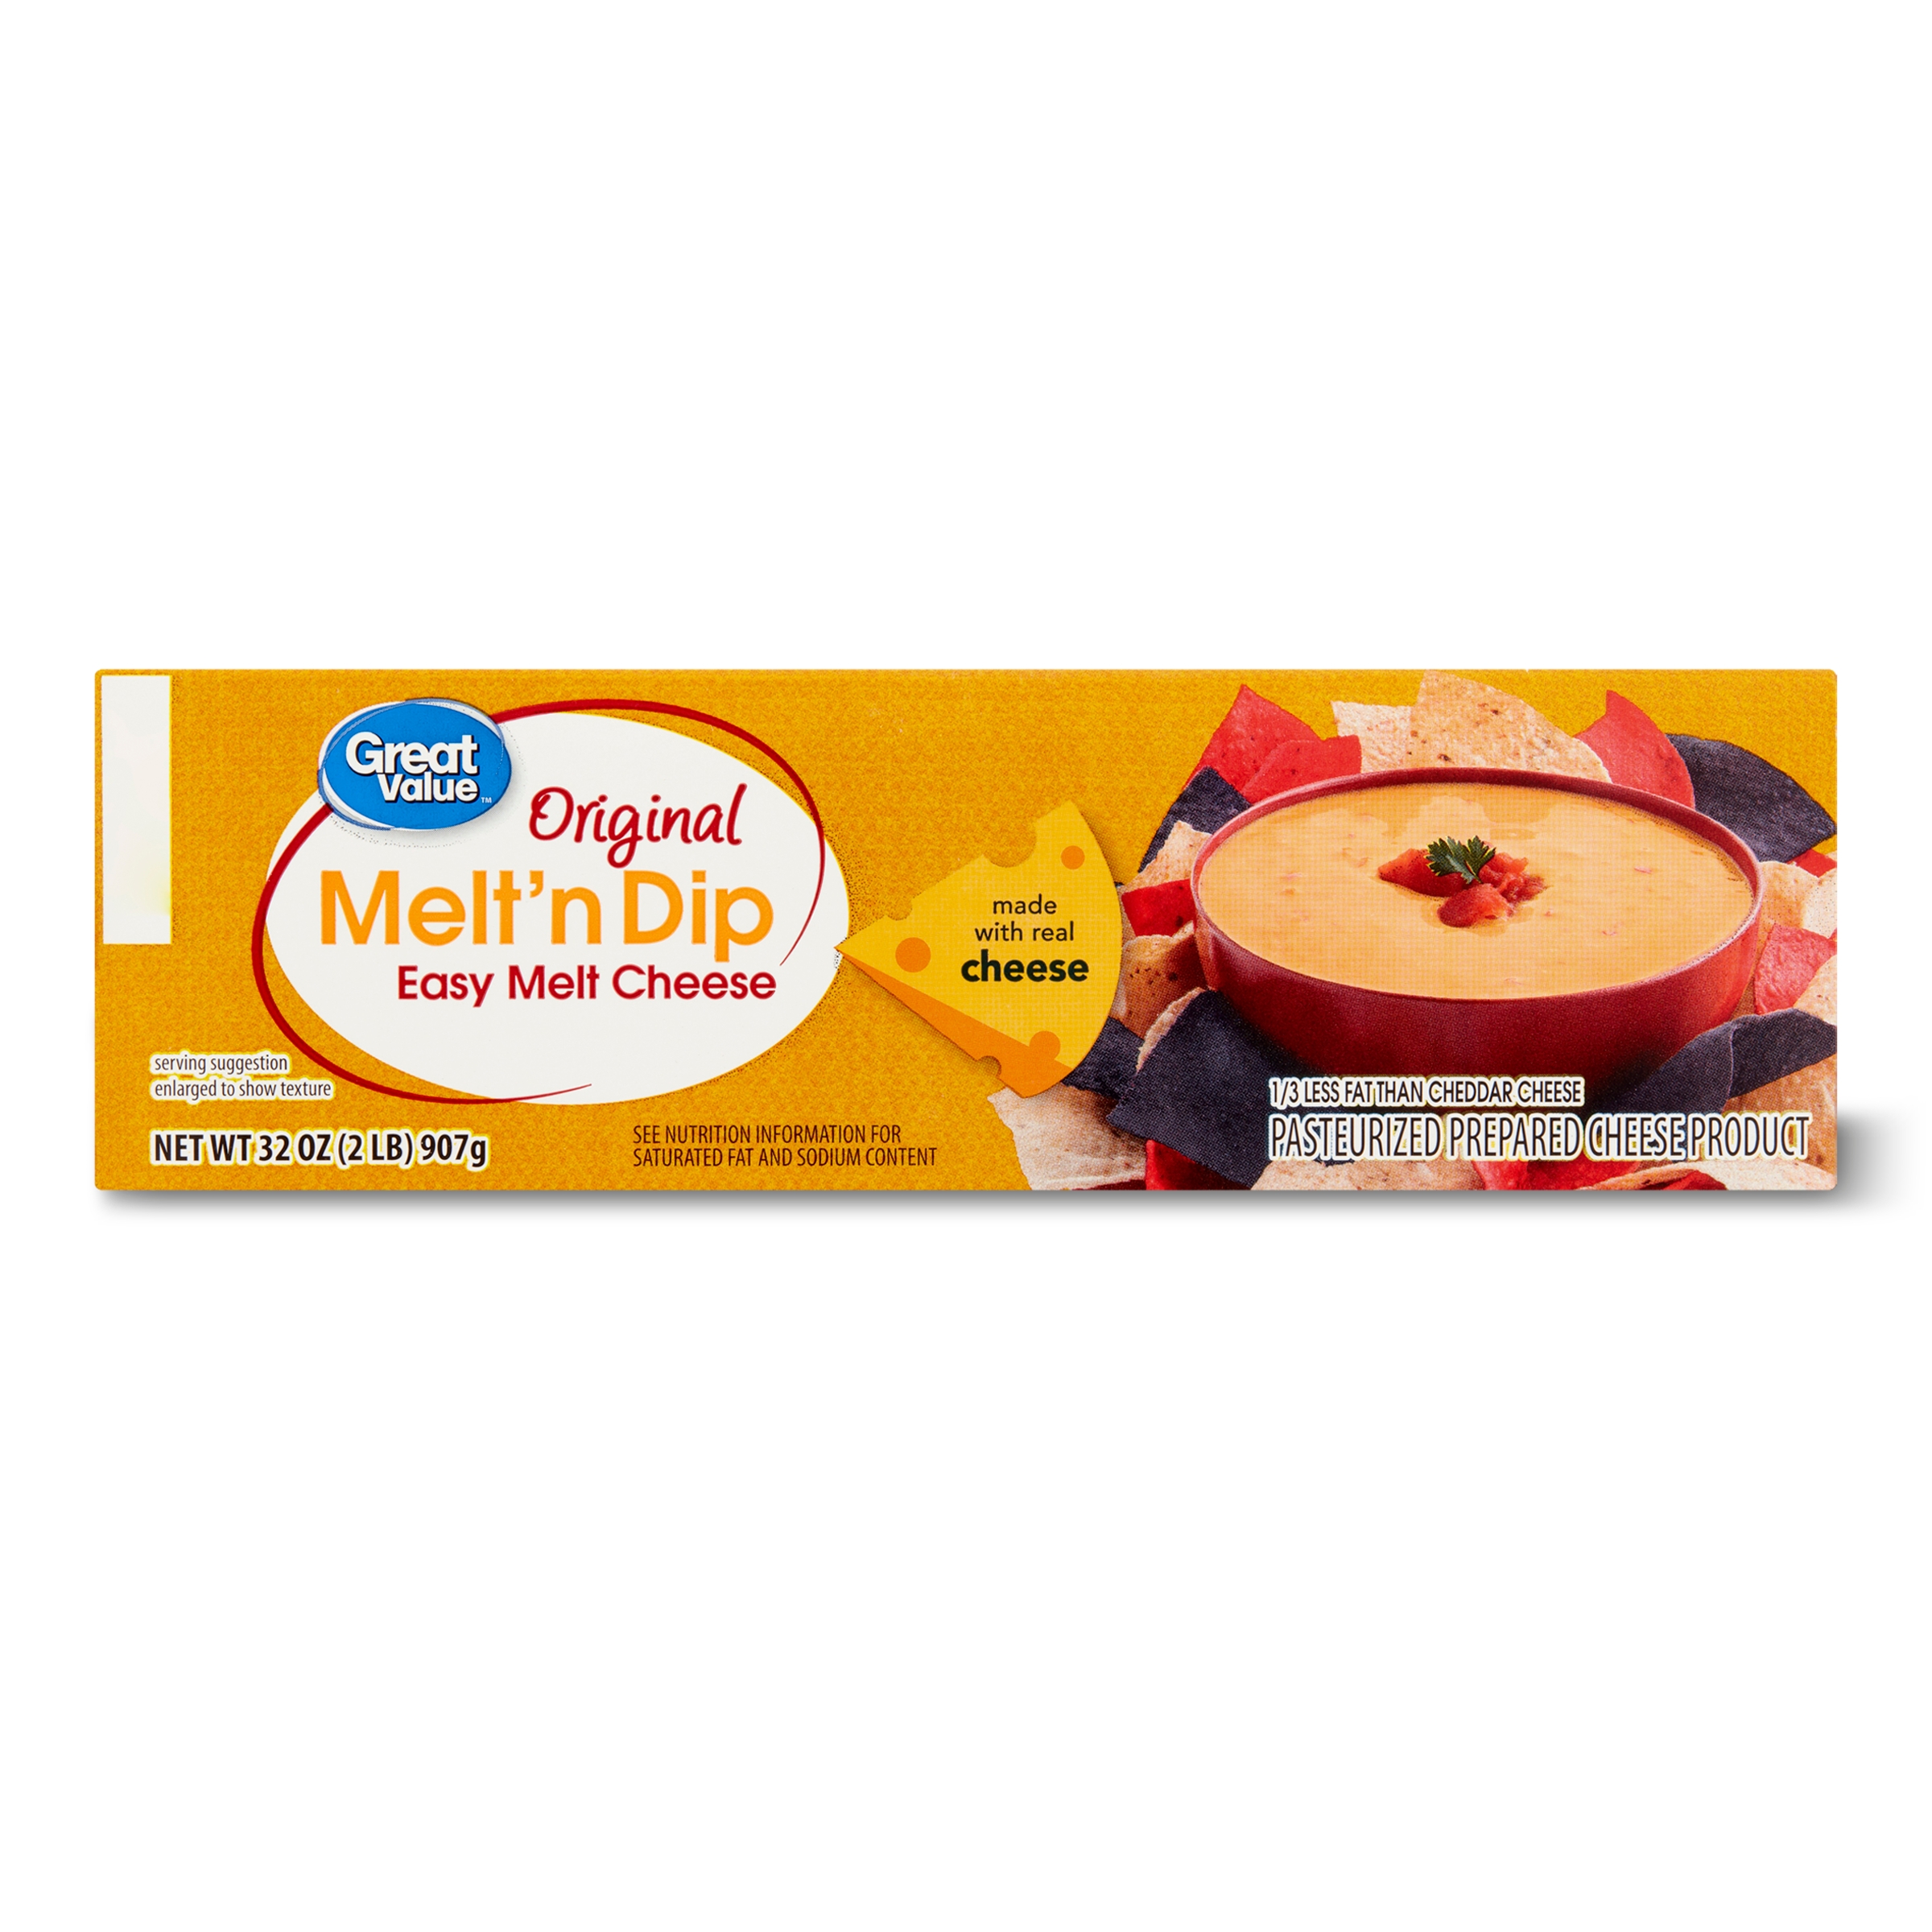 Great Value Melt'n Dip Easy Melt Cheese, 32 oz - image 1 of 7